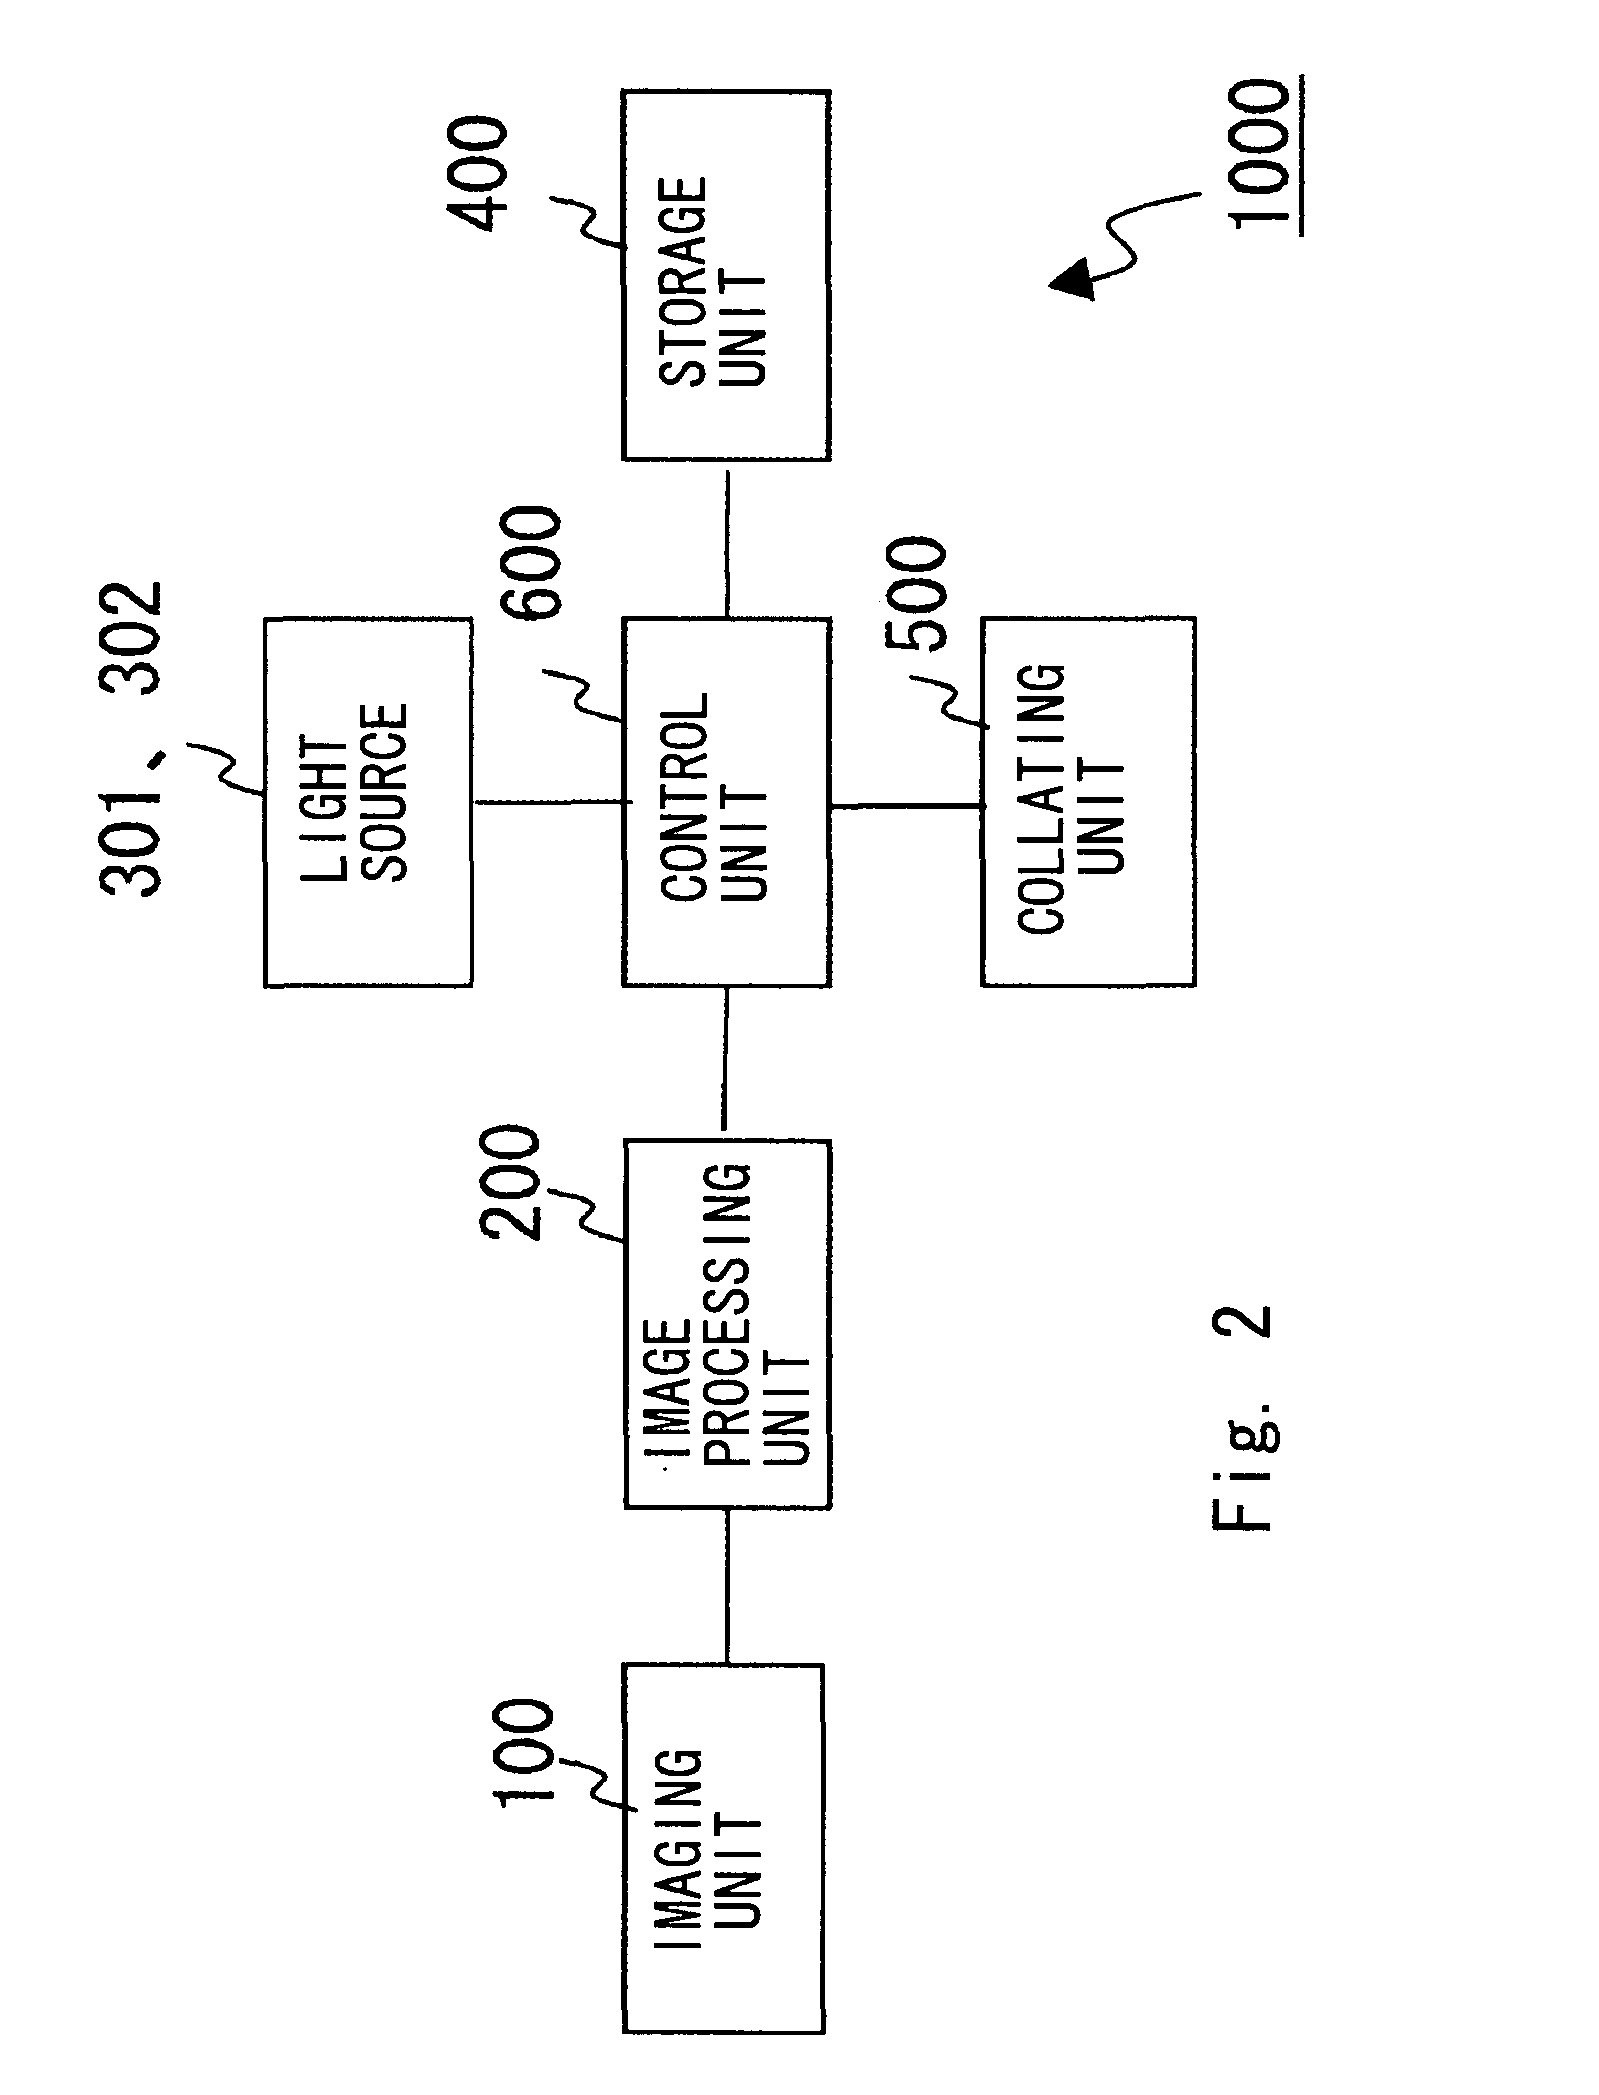 Imaging device and biometrics authentication apparatus